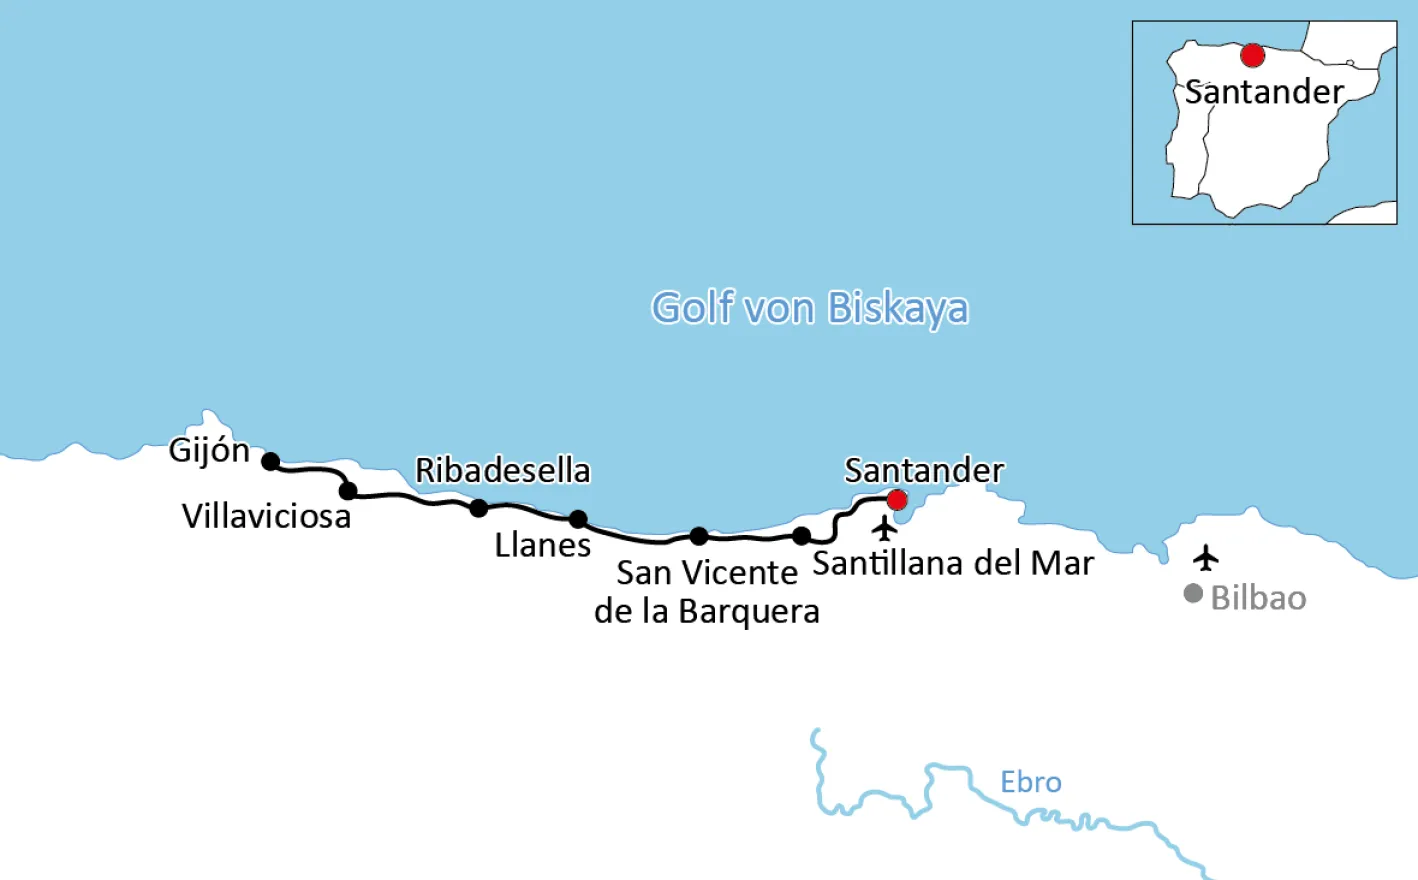 Map for the bike tour along the Atlantic coast in Spain